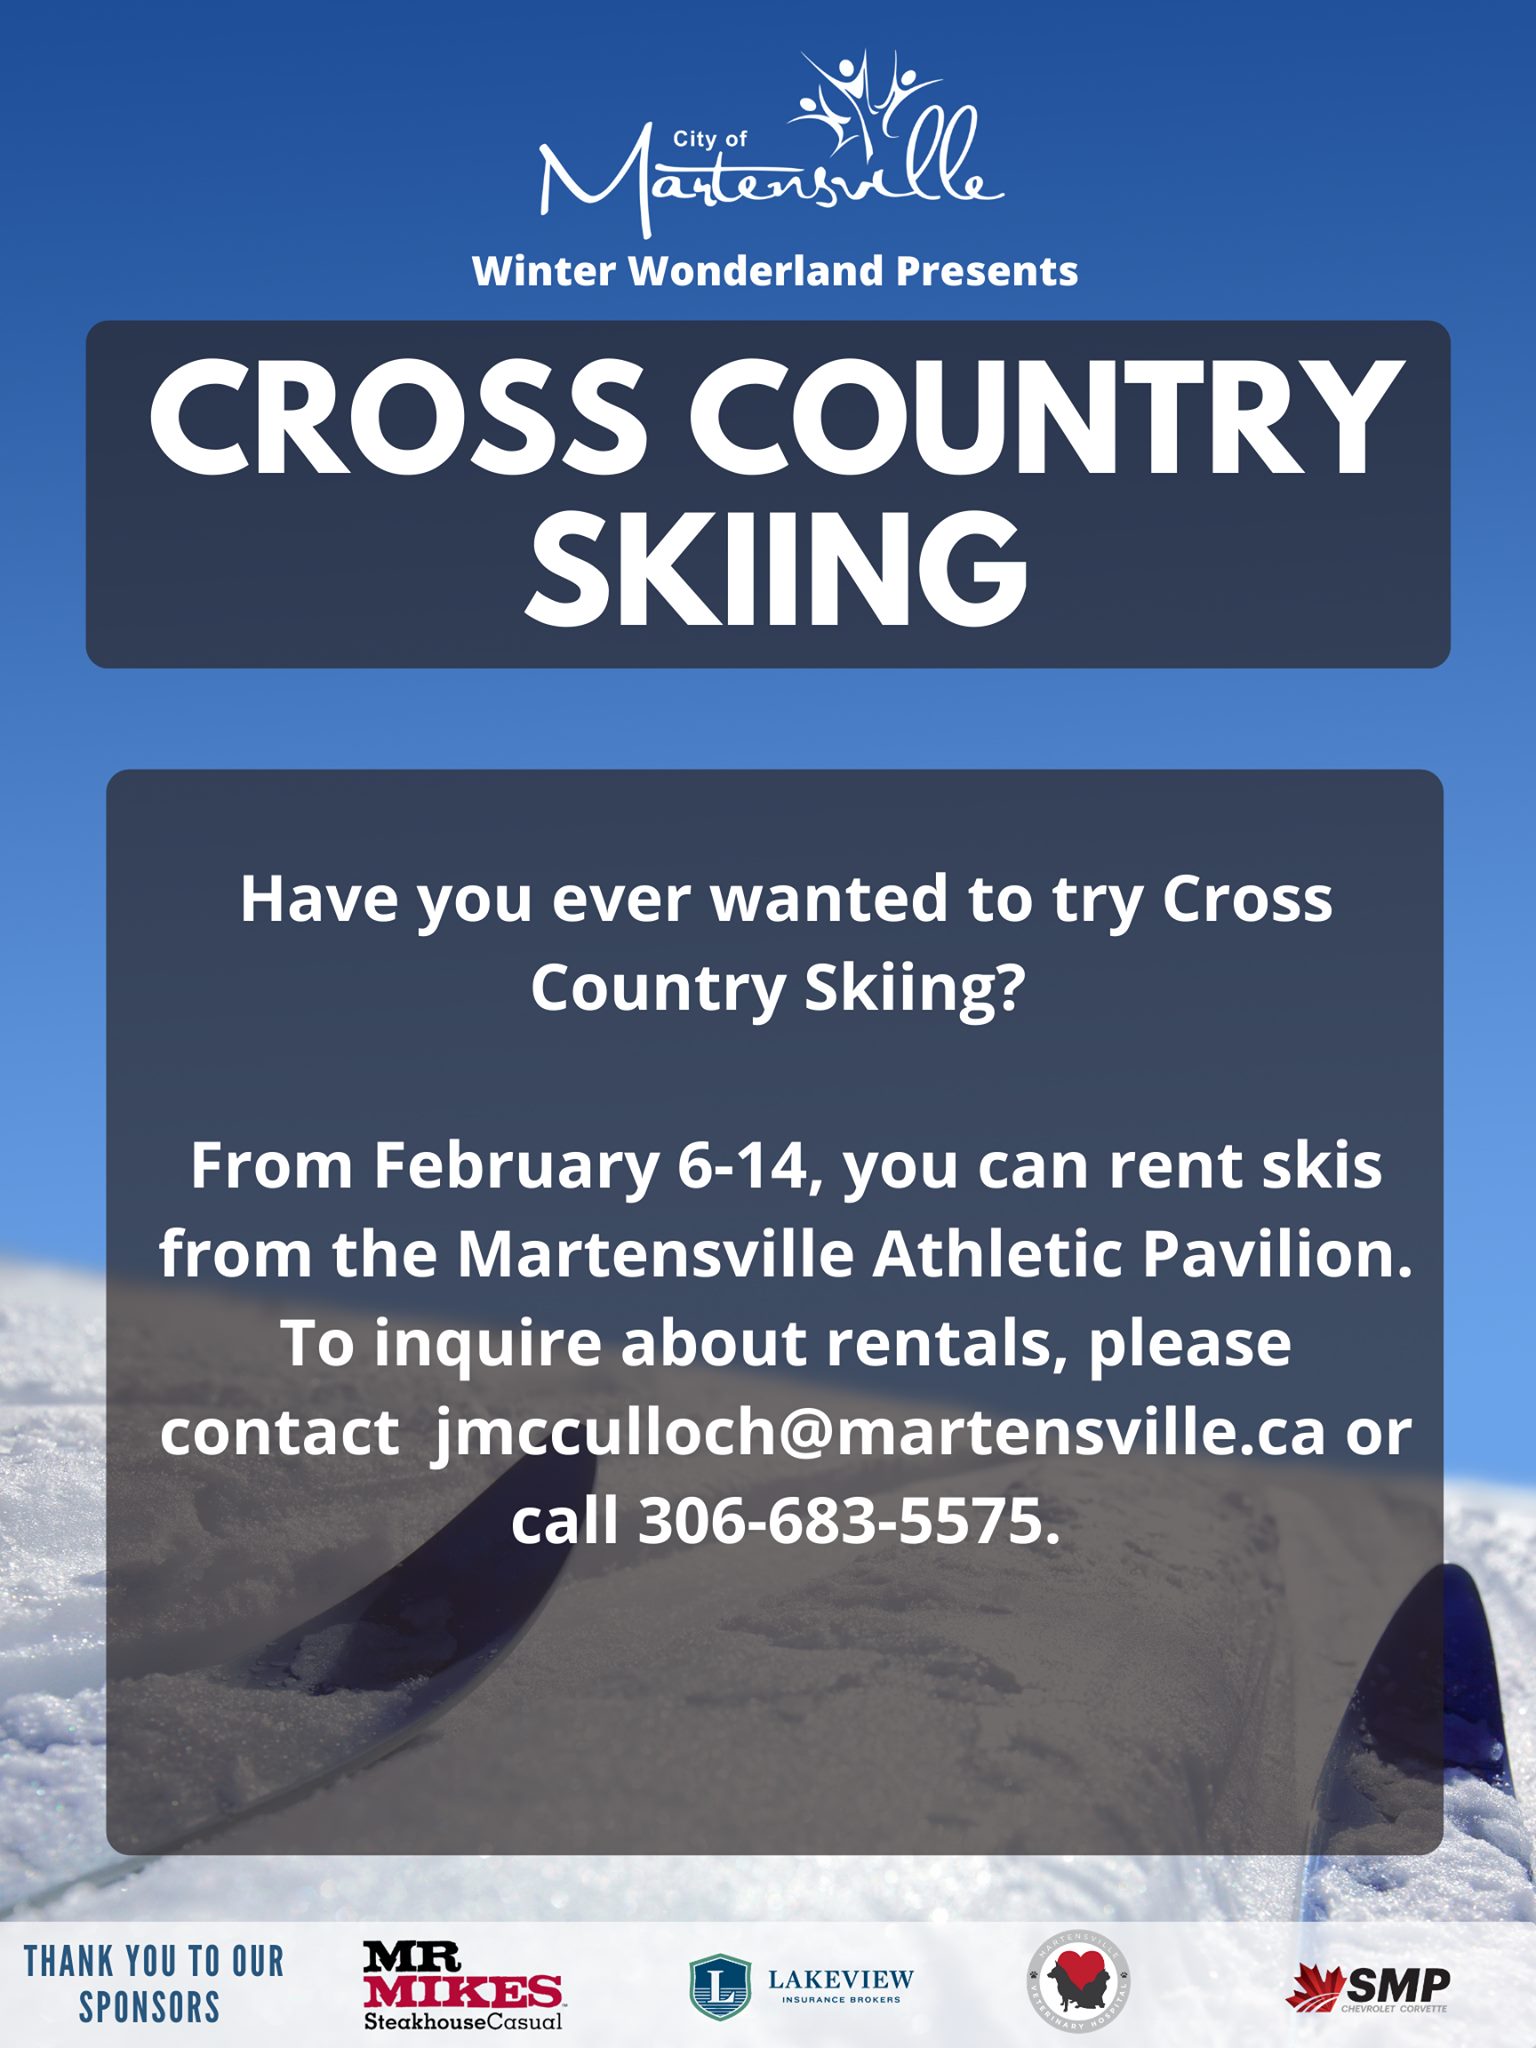 Cross Country Skiing in the City of Martensville